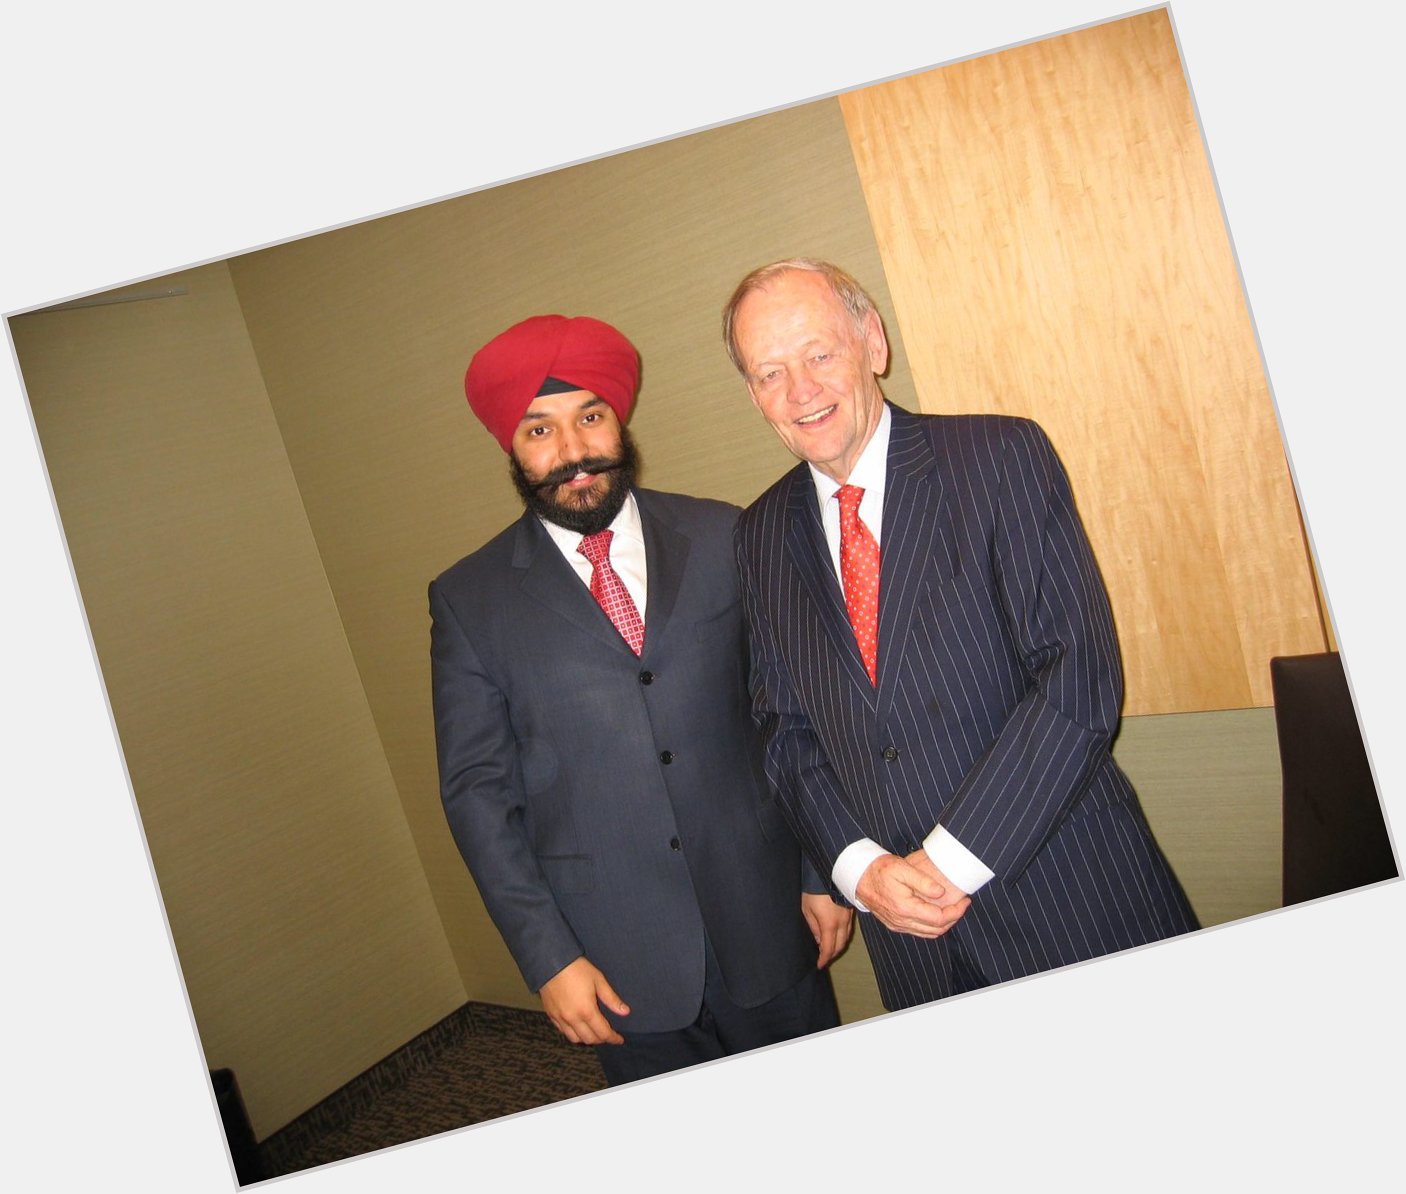 To the one and only Jean Chrétien, happy 85th birthday. Thank you for your longstanding service to Canada. 